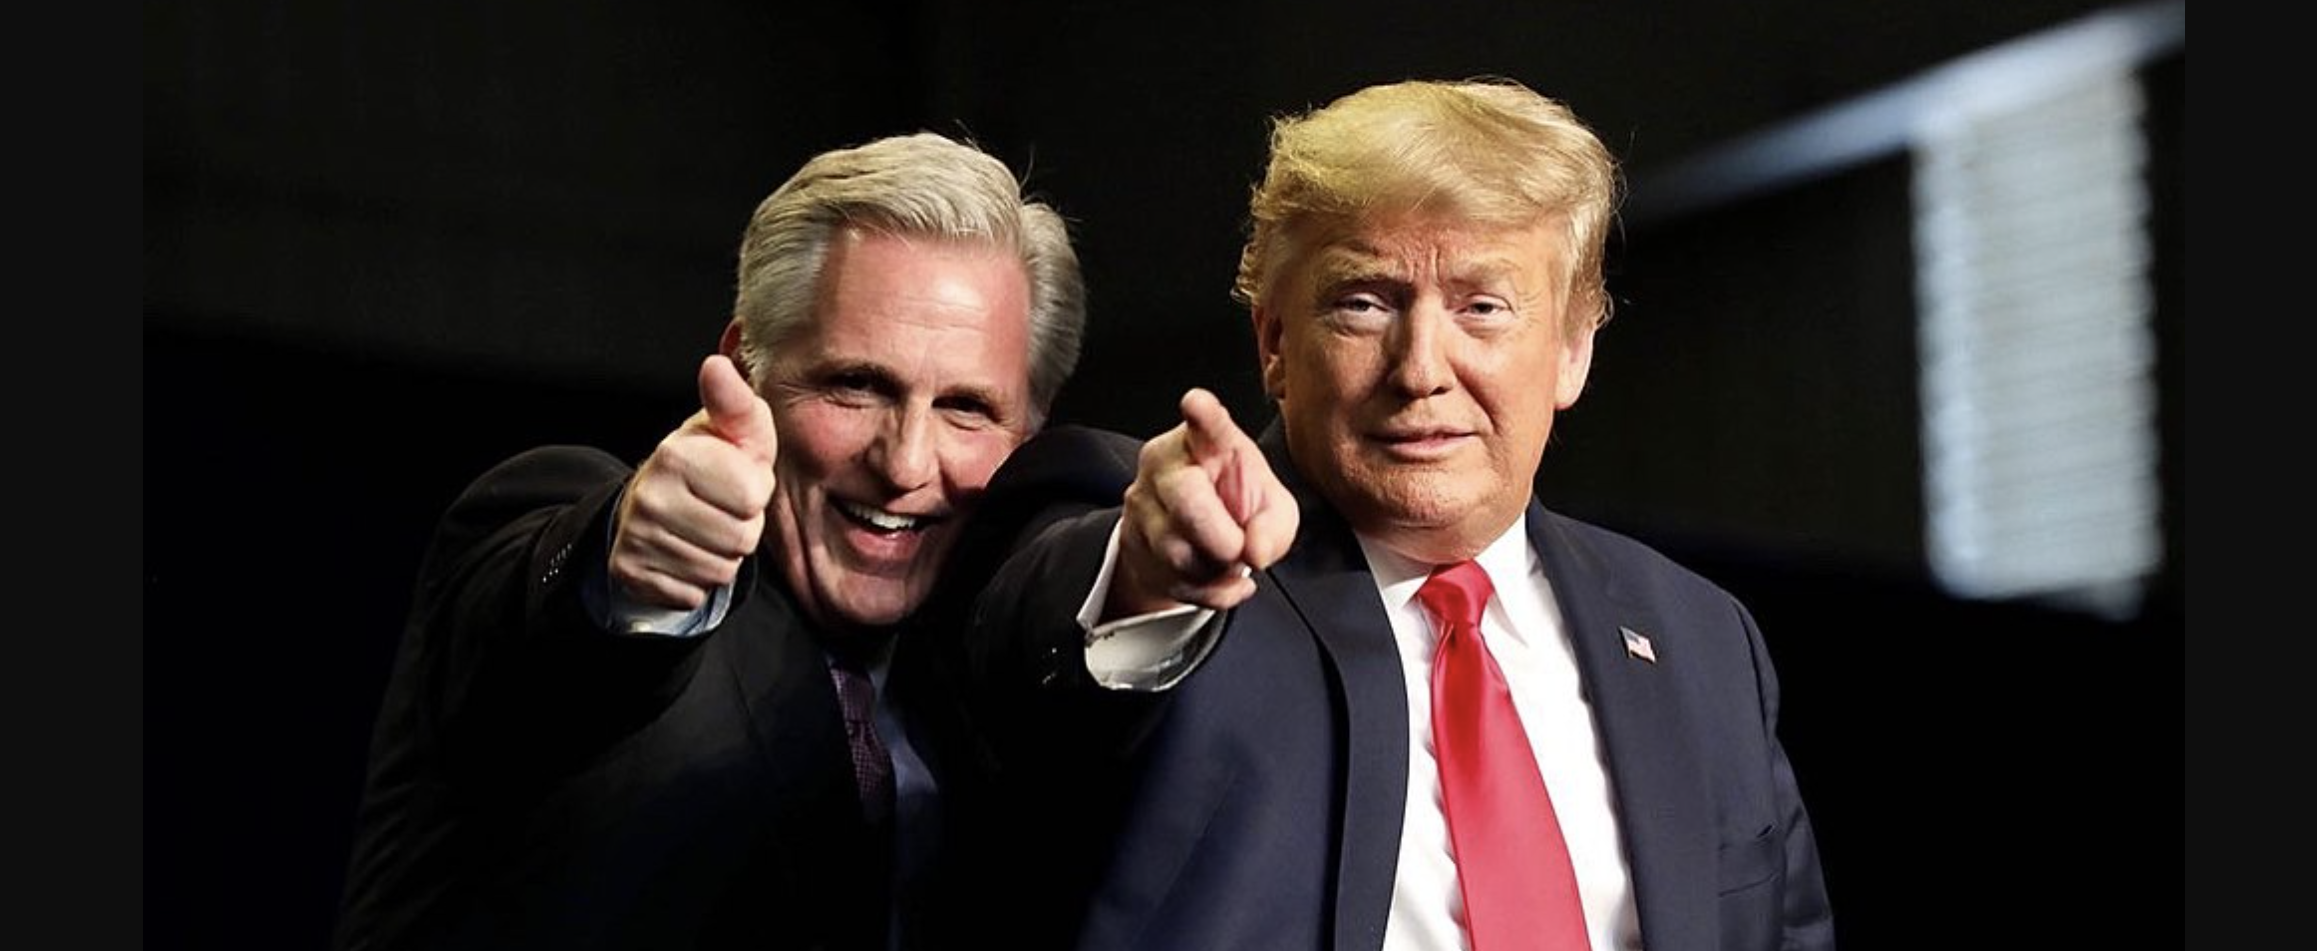 McCarthy and Trump pointing